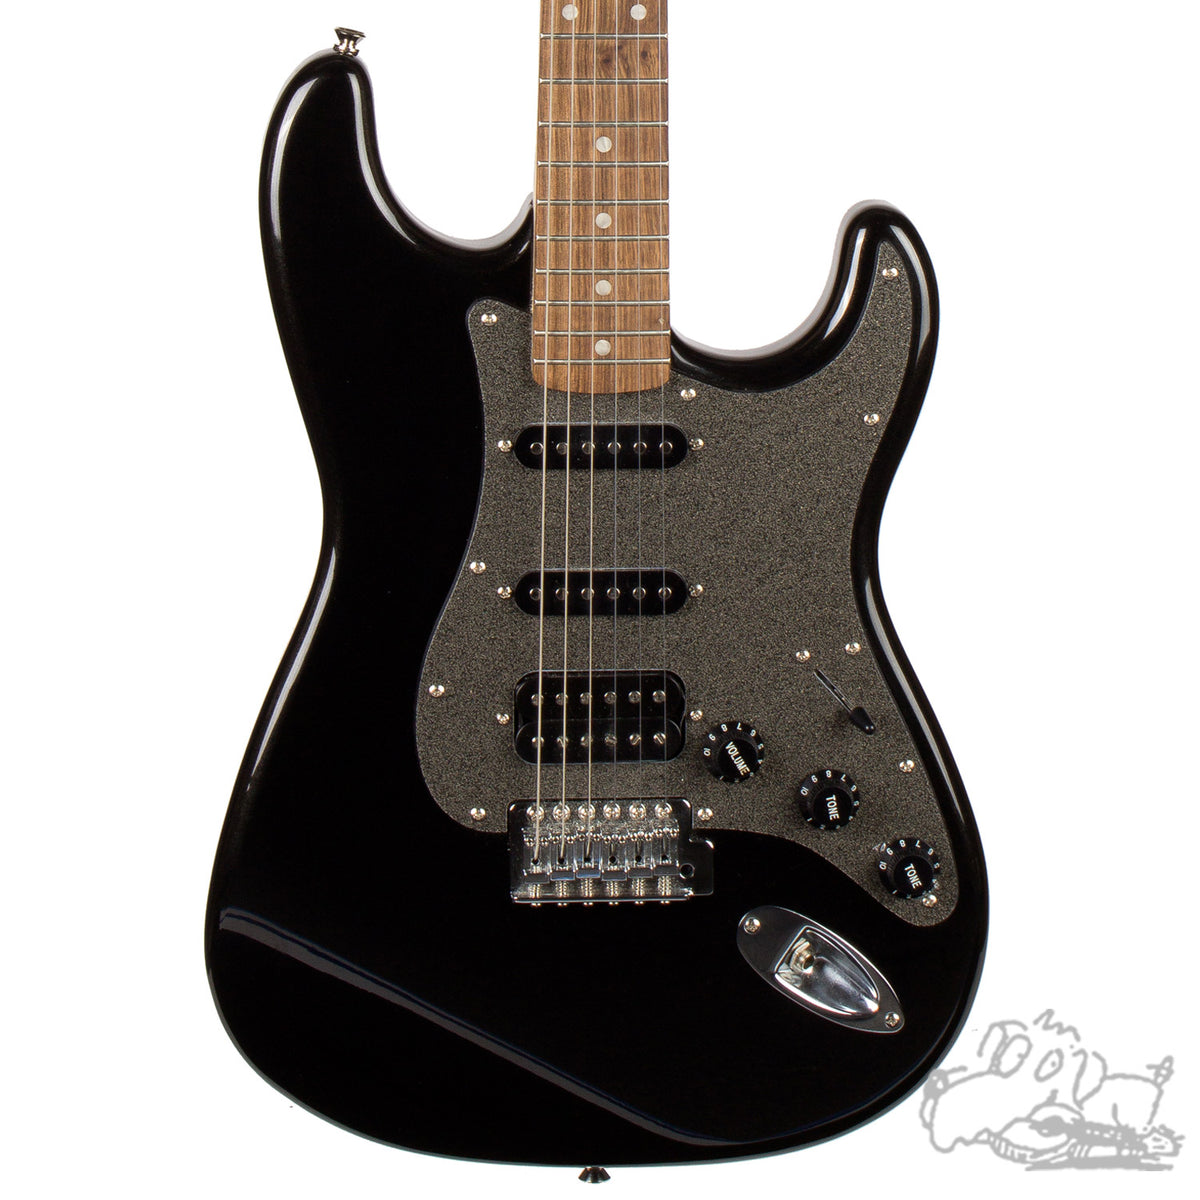 Used Squier Affinity HSS Stratocaster - Black with Sparkle Pickguard